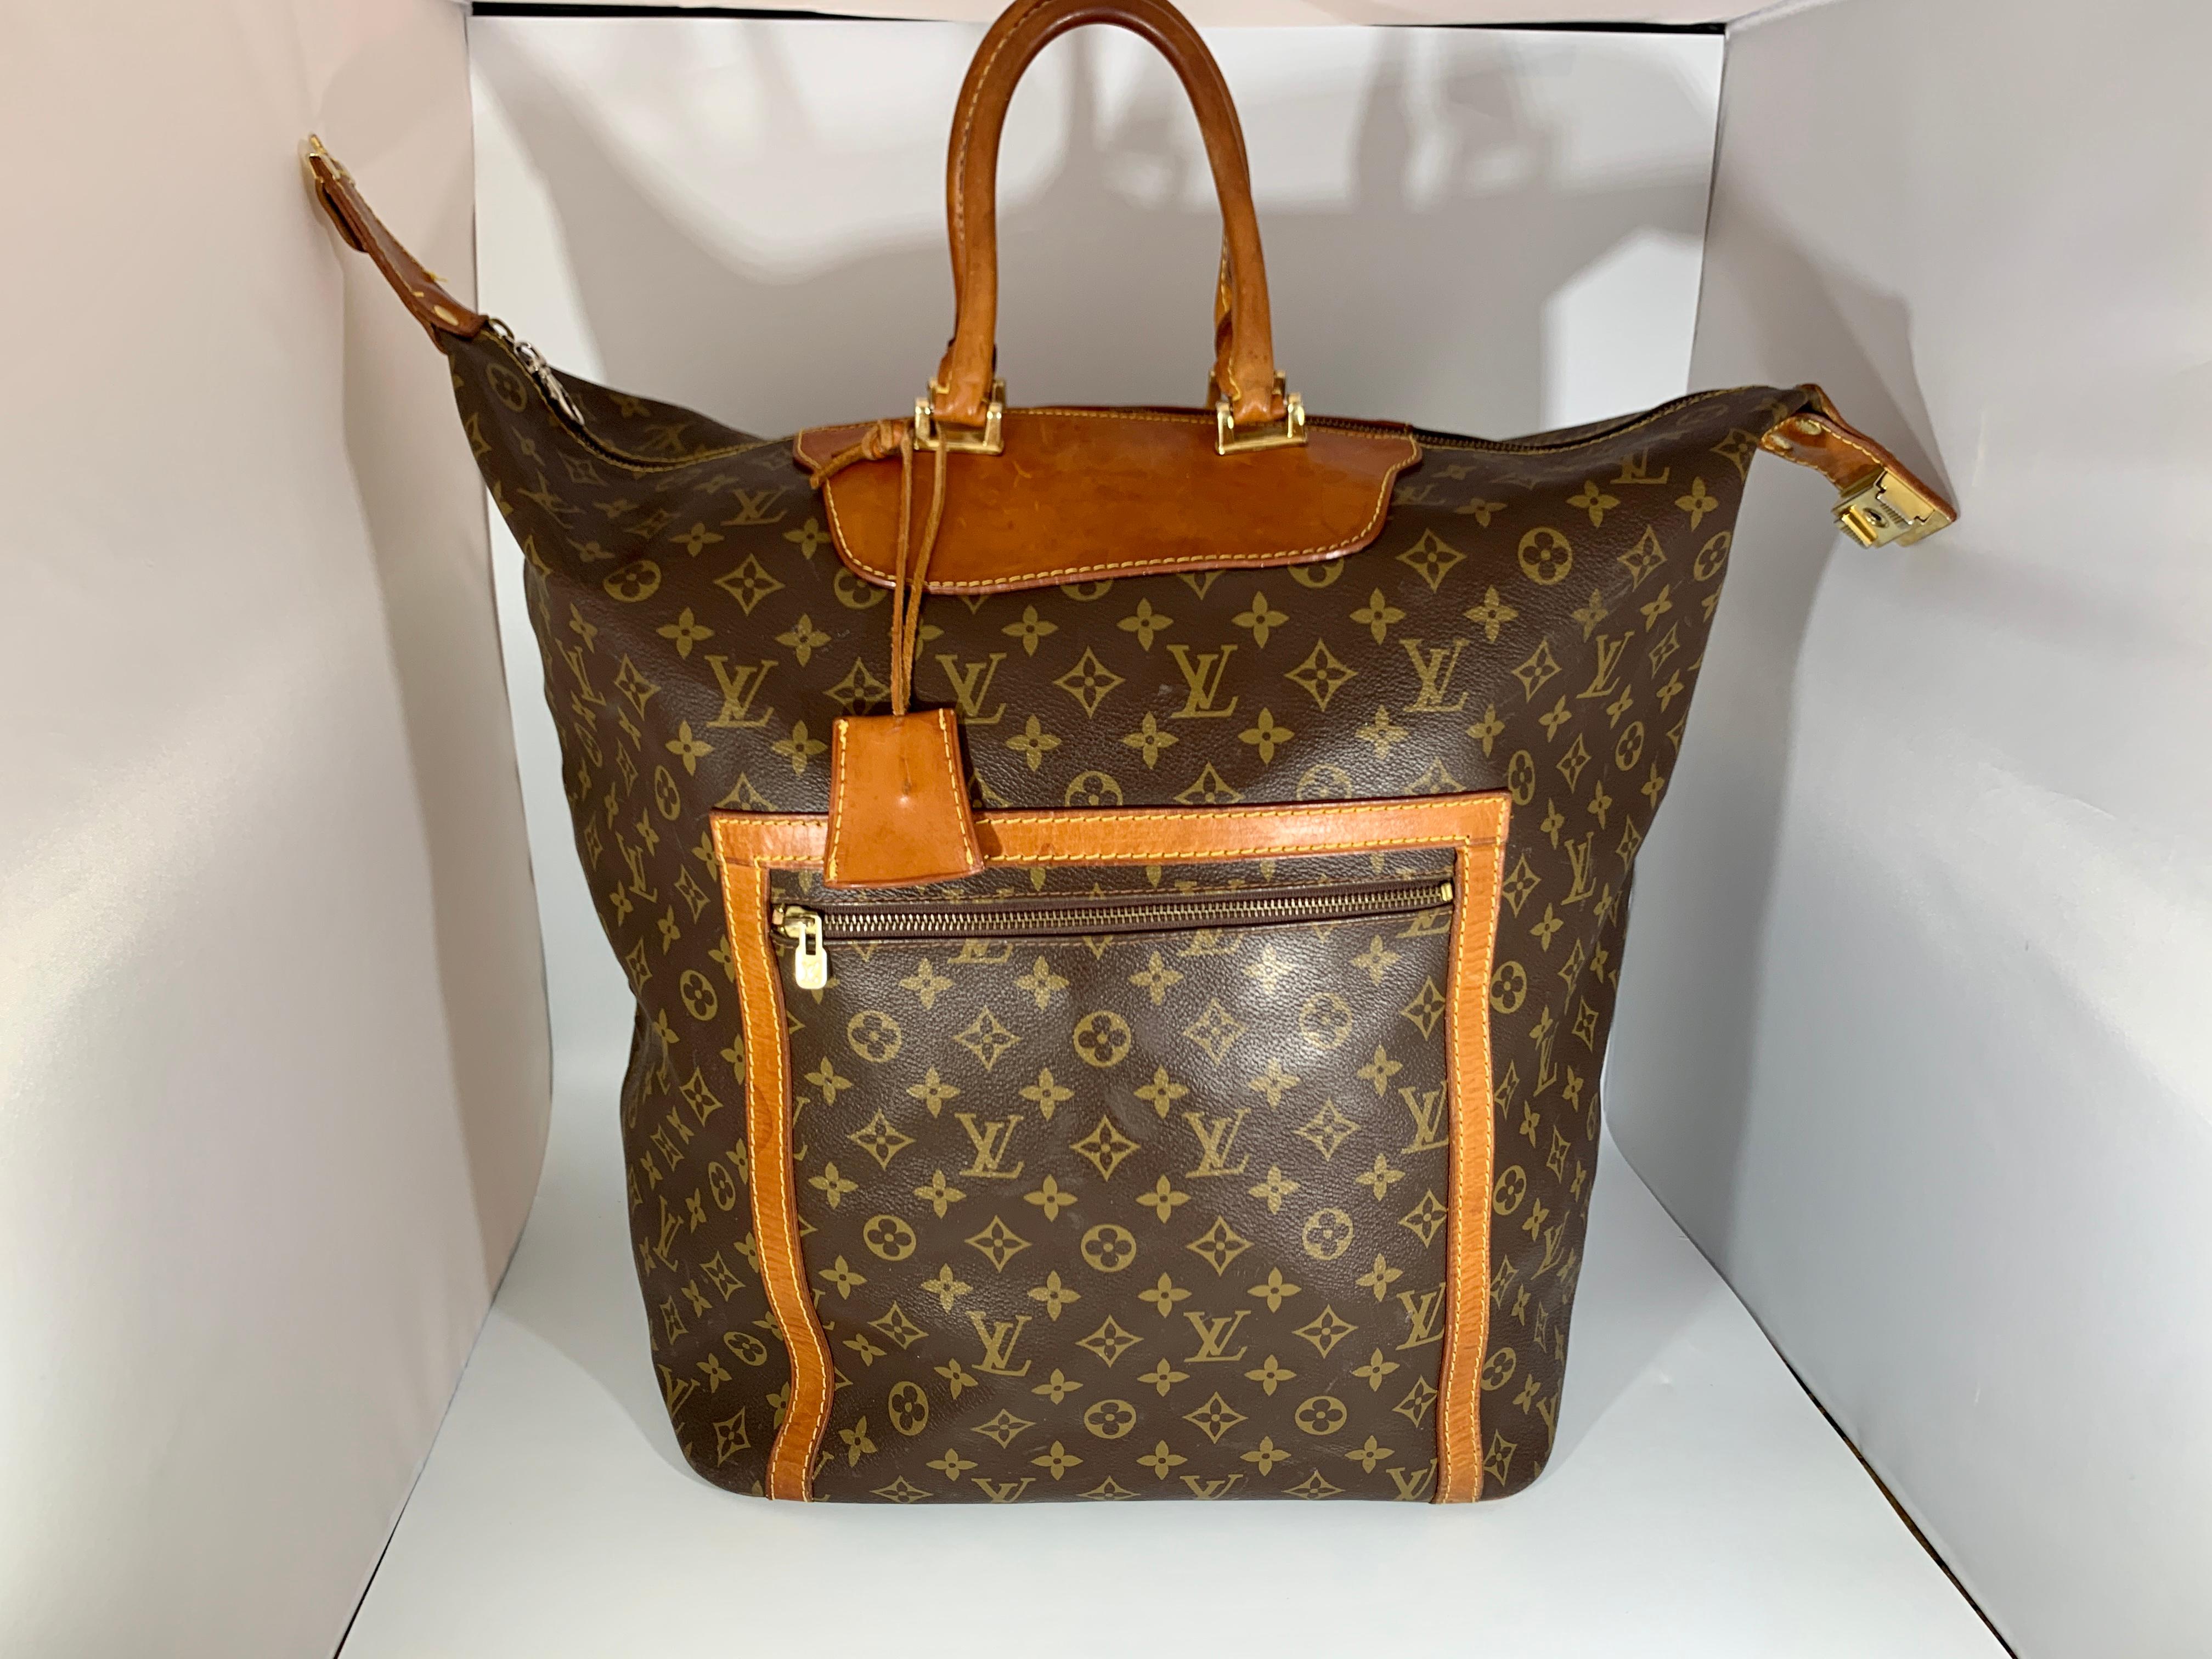 LOUIS VUITTON
French Company Vintage 
Description
Brown and tan monogram coated canvas.
 A rare find .
 selling my extremely rare and hard to come by authentic louis vuitton saks fifth ave steamer trunk bag. this bag is great for any home. and the